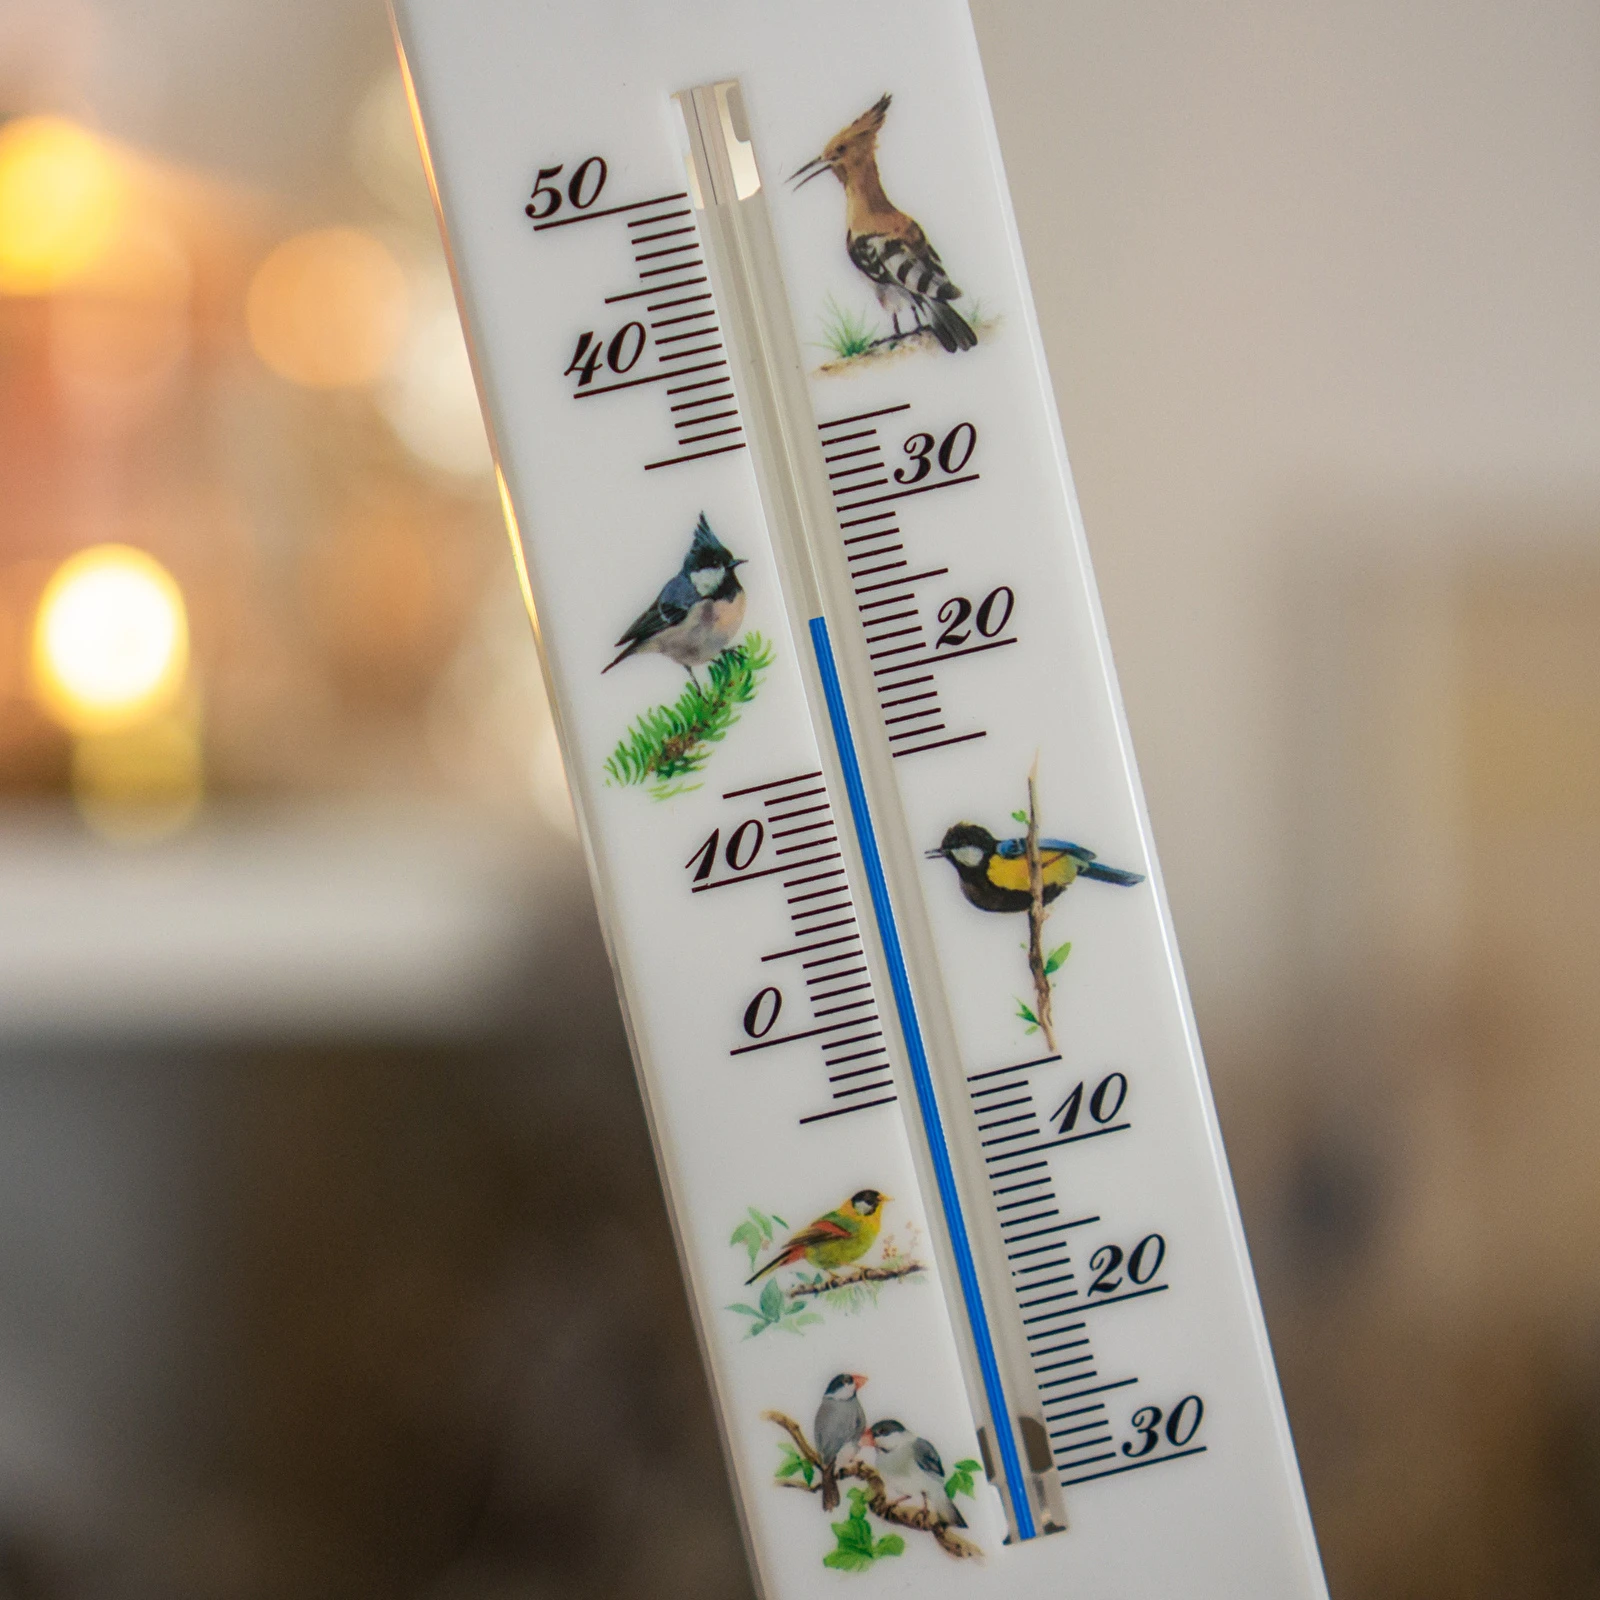 https://browin.com/static/images/1600/universal-thermometer-with-a-pattern-birds-30-c-do-50-c-20cm-014600_8.webp